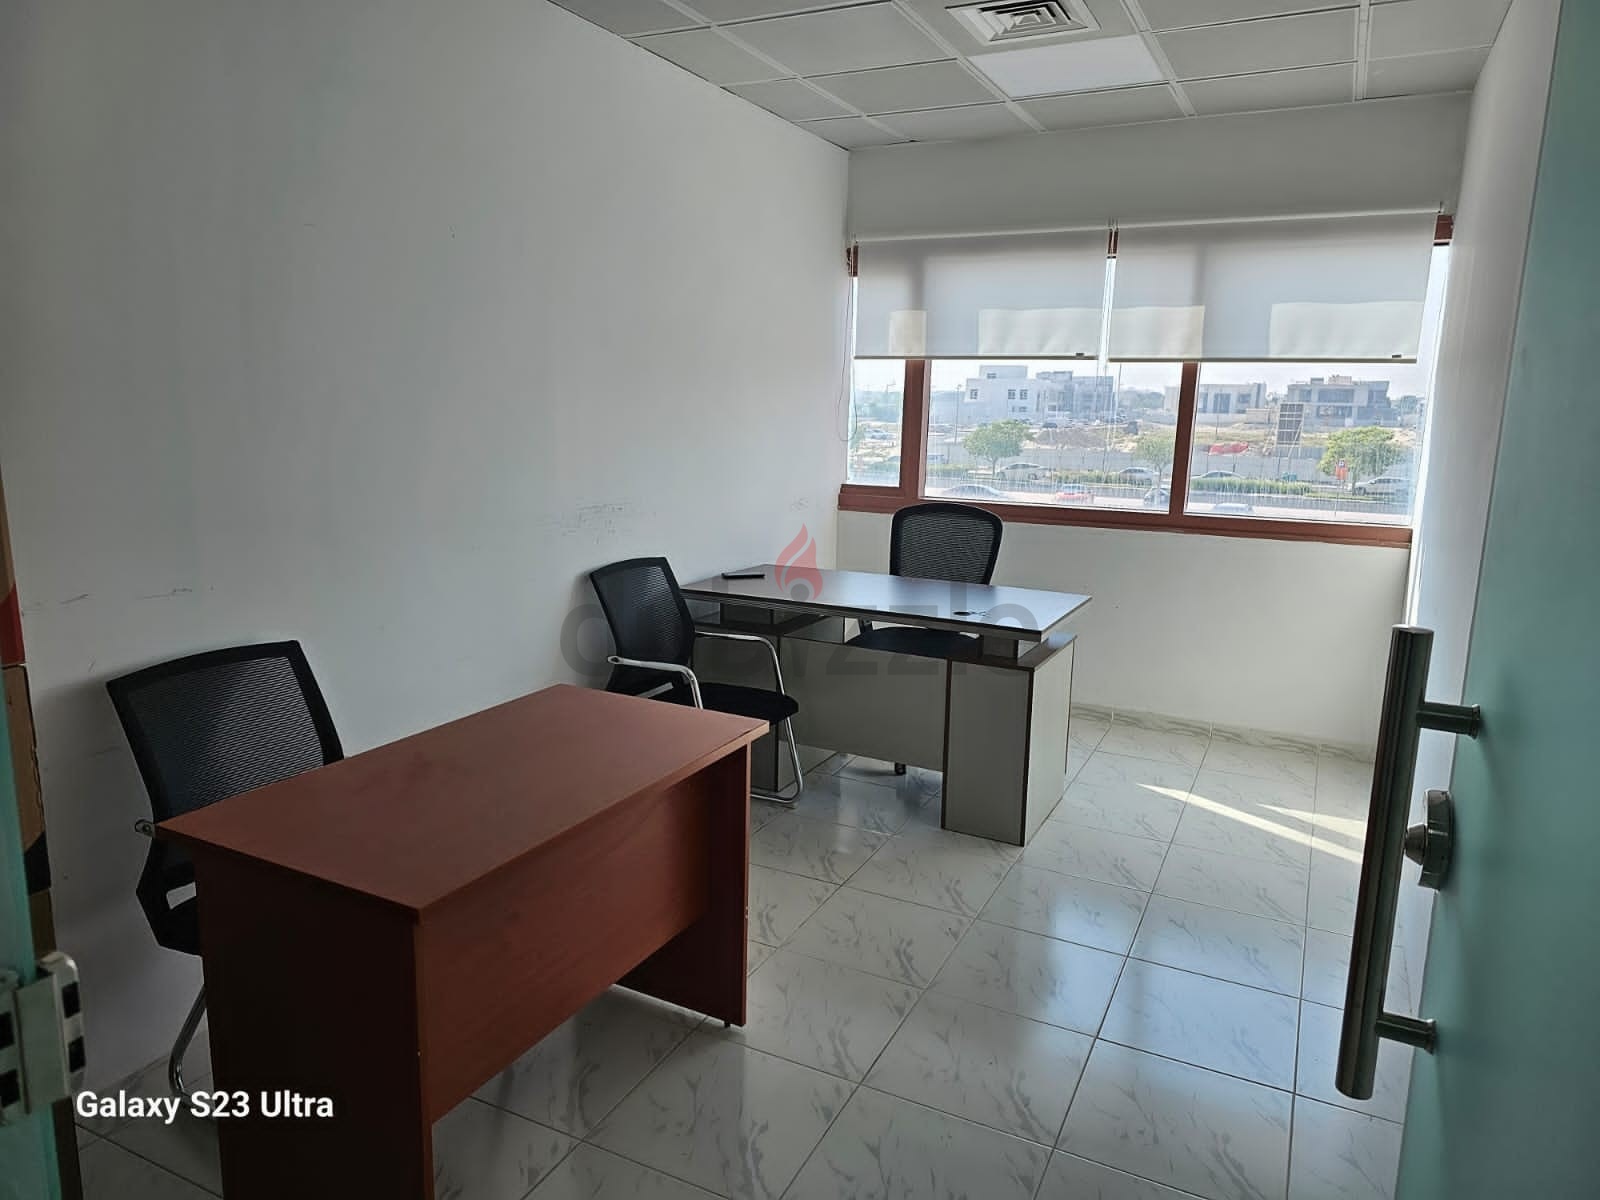 Furnished Office Space For Rent With Ejari / Virtual Ejari Also Available